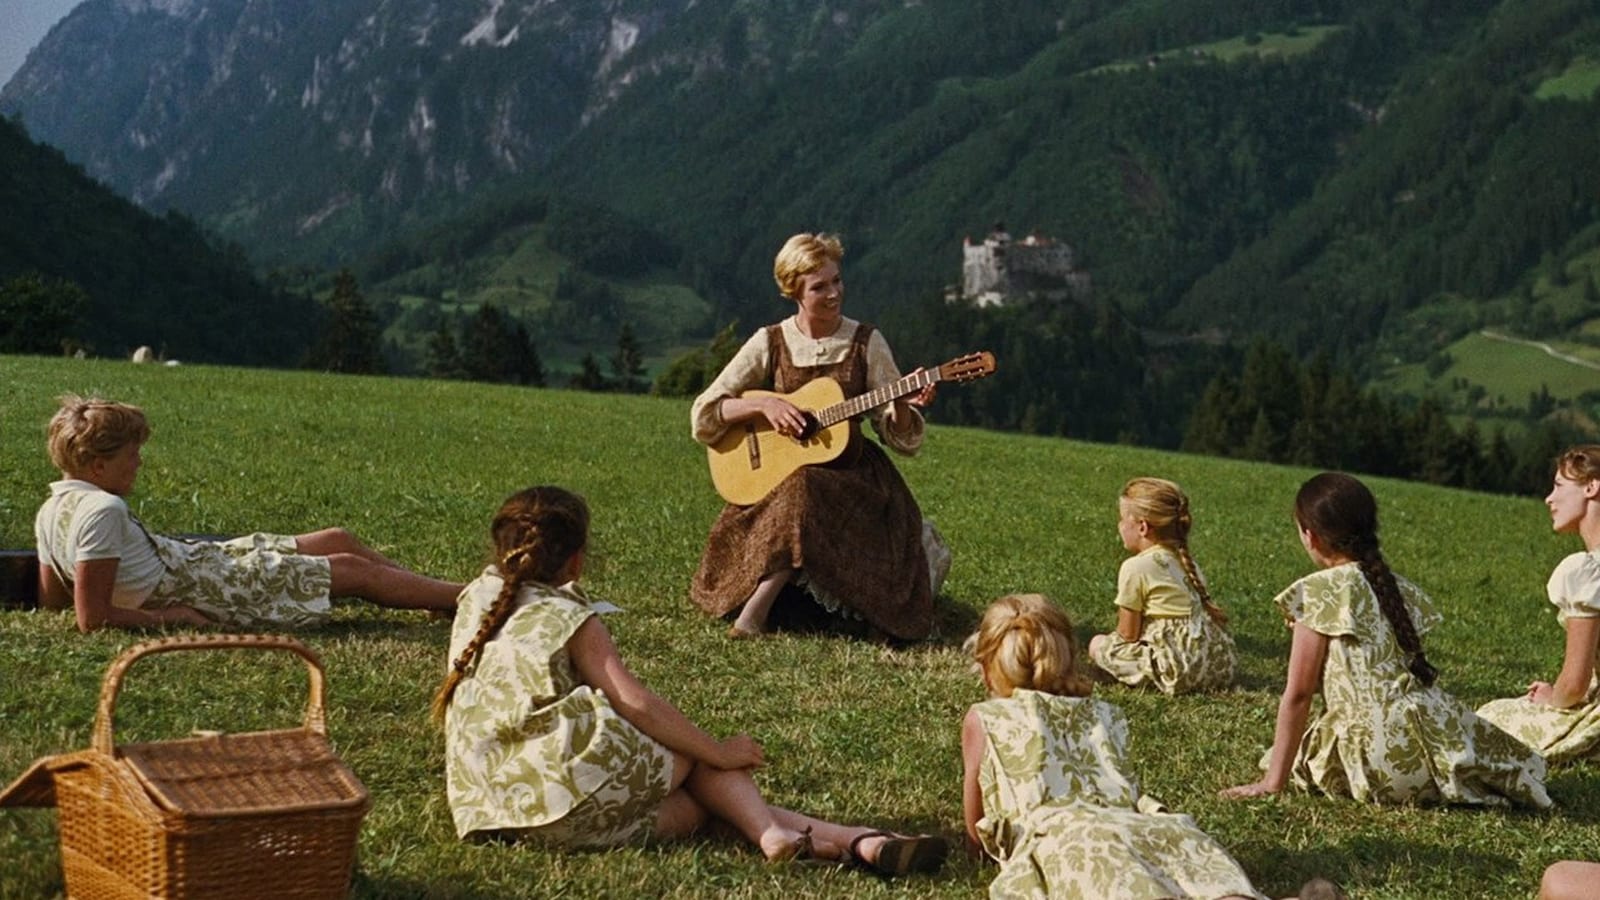 the-sound-of-music-1965